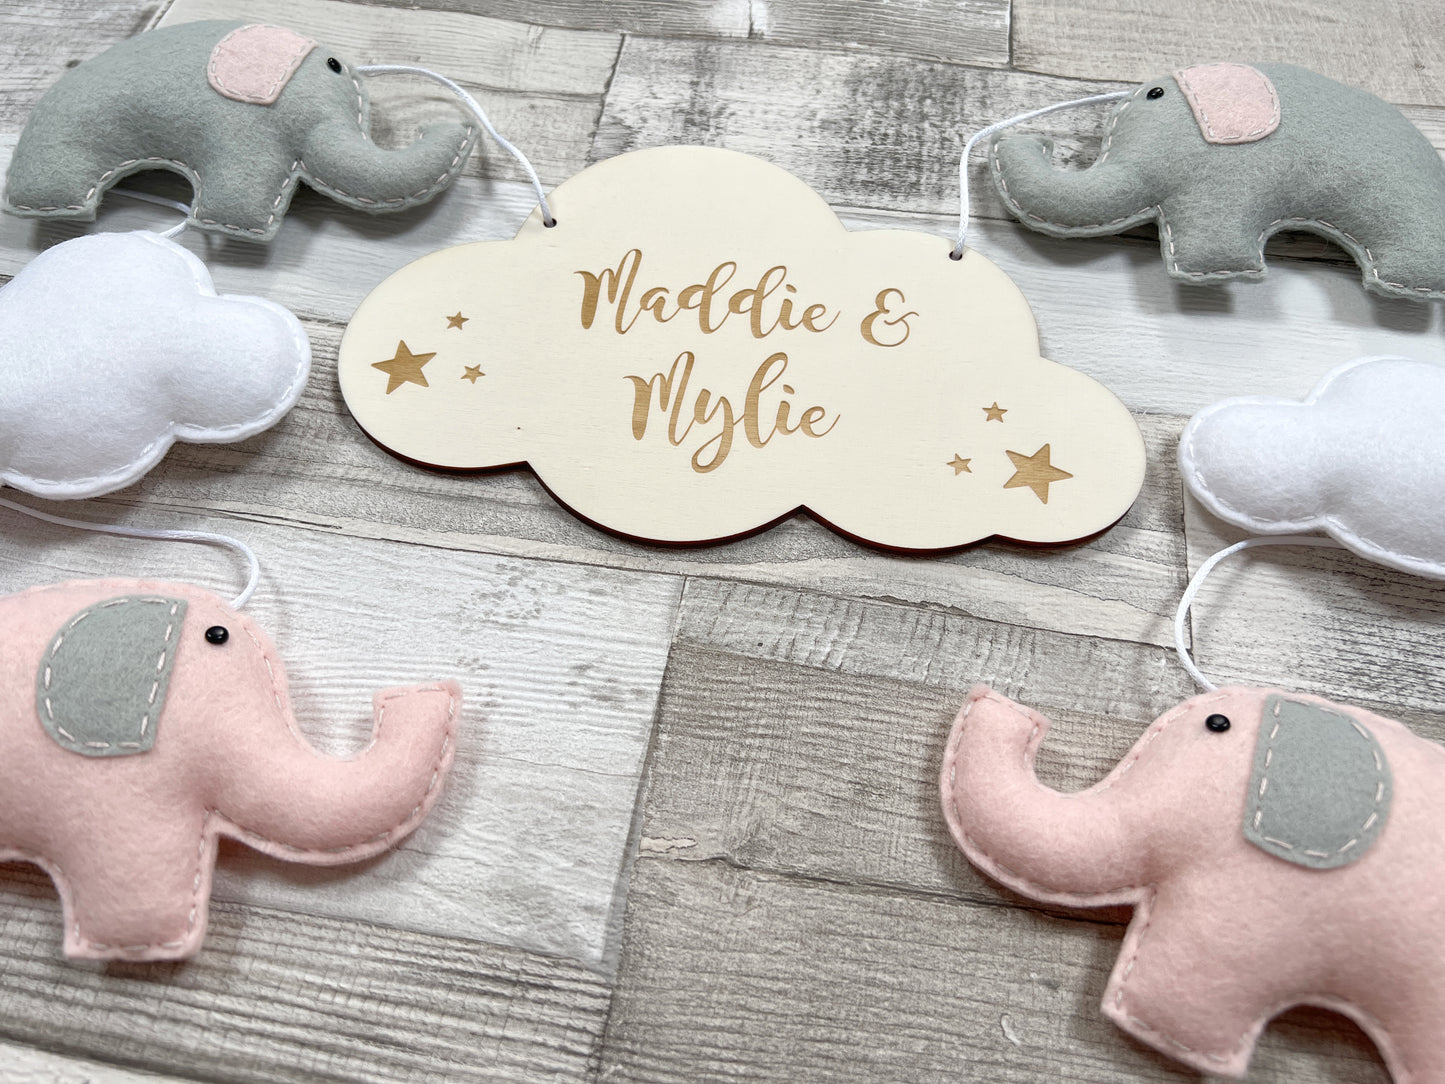 Personalised Engraved Cloud with Elephants & Clouds Bunting